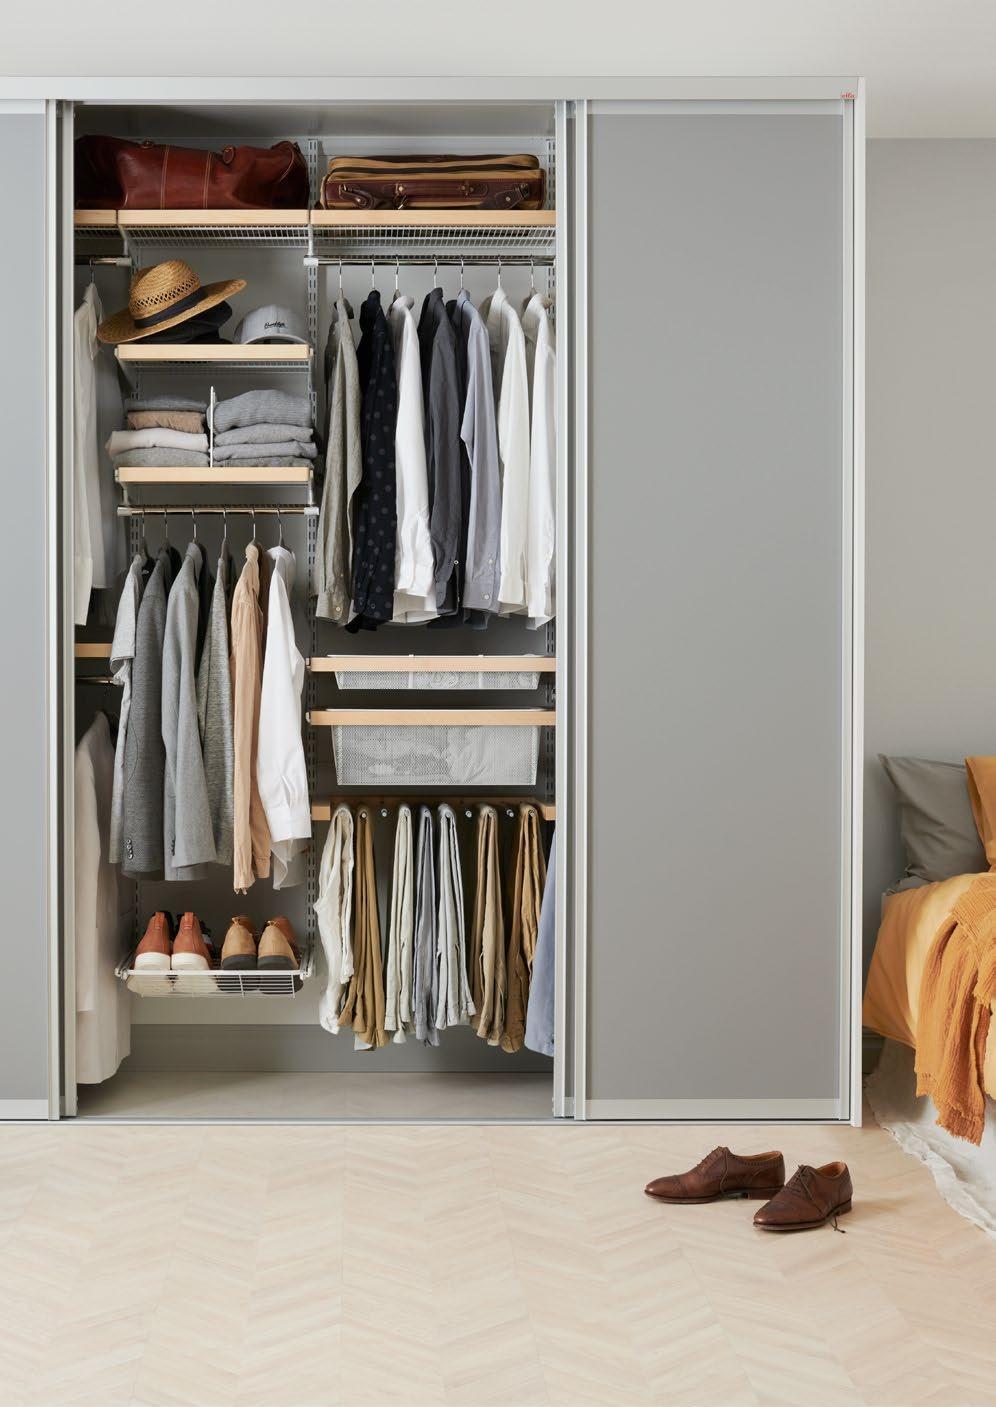 A closet, with details adapted to your needs will give a great overview and make your clothes and other items easy accessible.